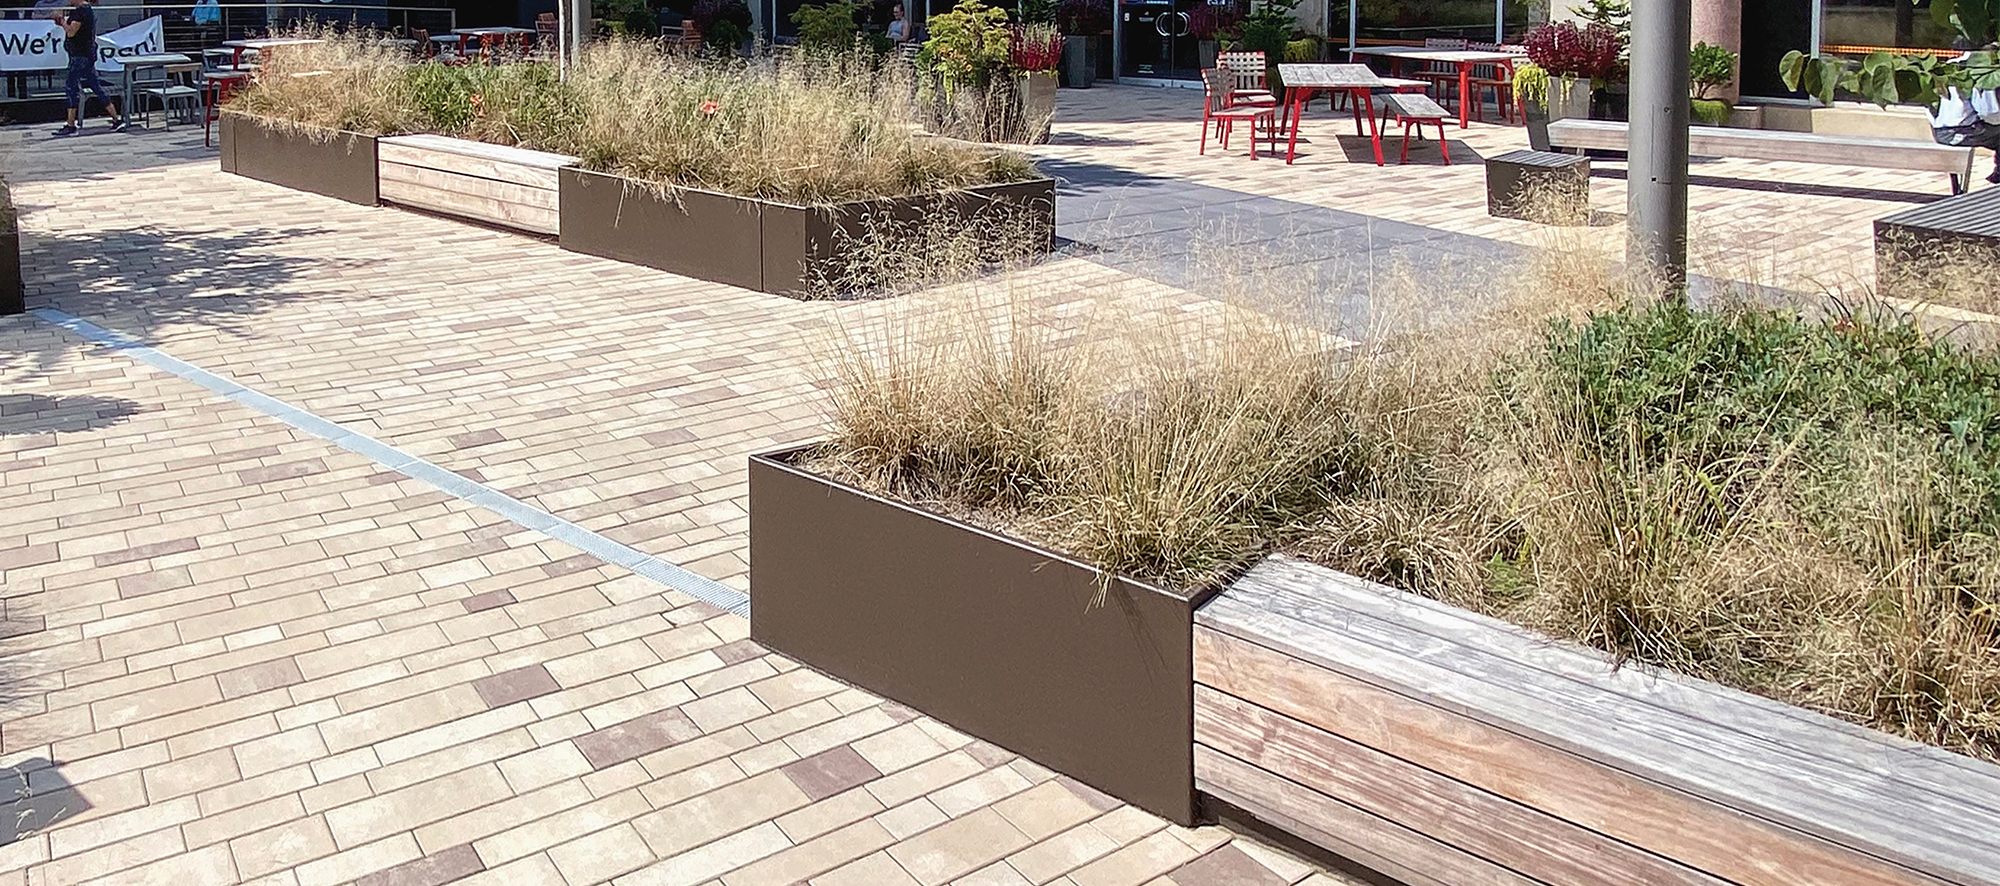 A pedestrian plaza made with Artline rectangular pavers in a mix of warm colors and a stripe of dark colors includes seating and plants.